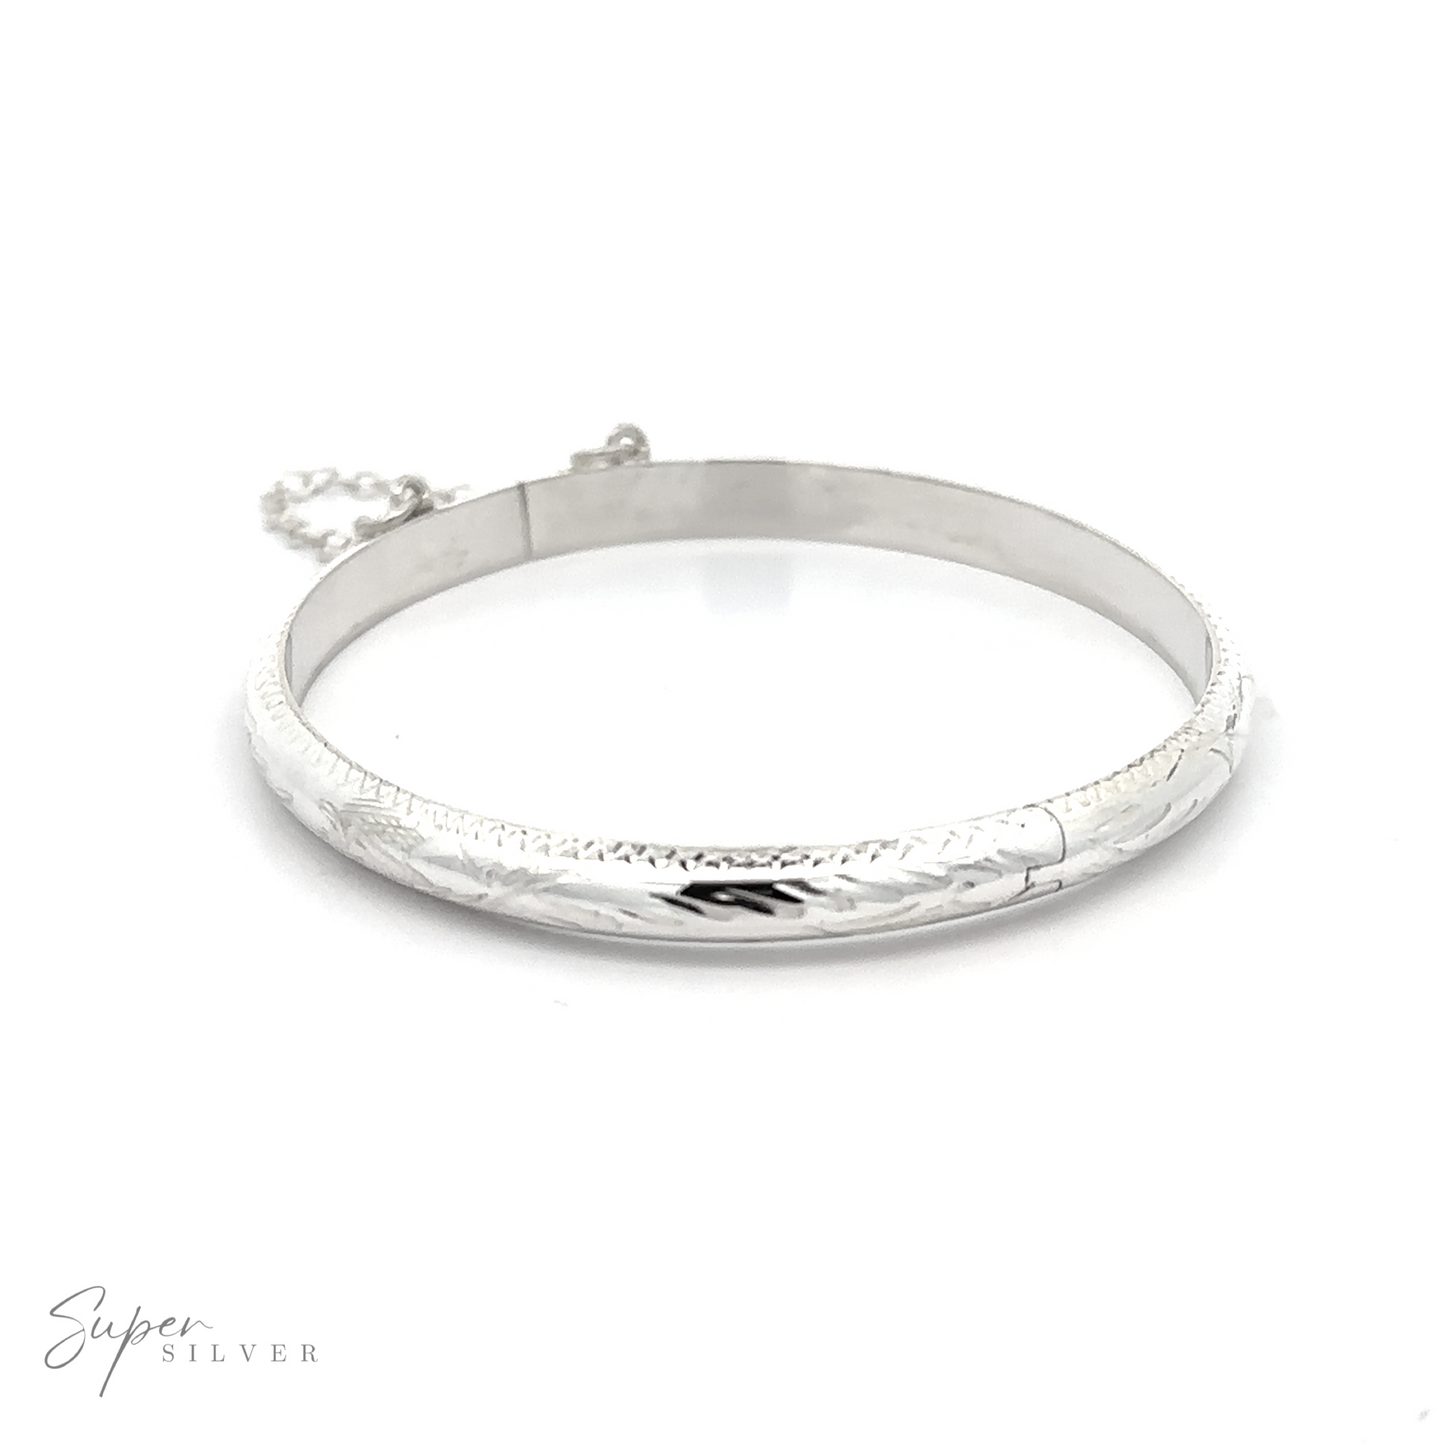 A Small Etched Latching Bangle with an intricate engraved design and a safety chain attached. Crafted from .925 Sterling Silver, it features the "Super Silver" logo in the bottom left corner.